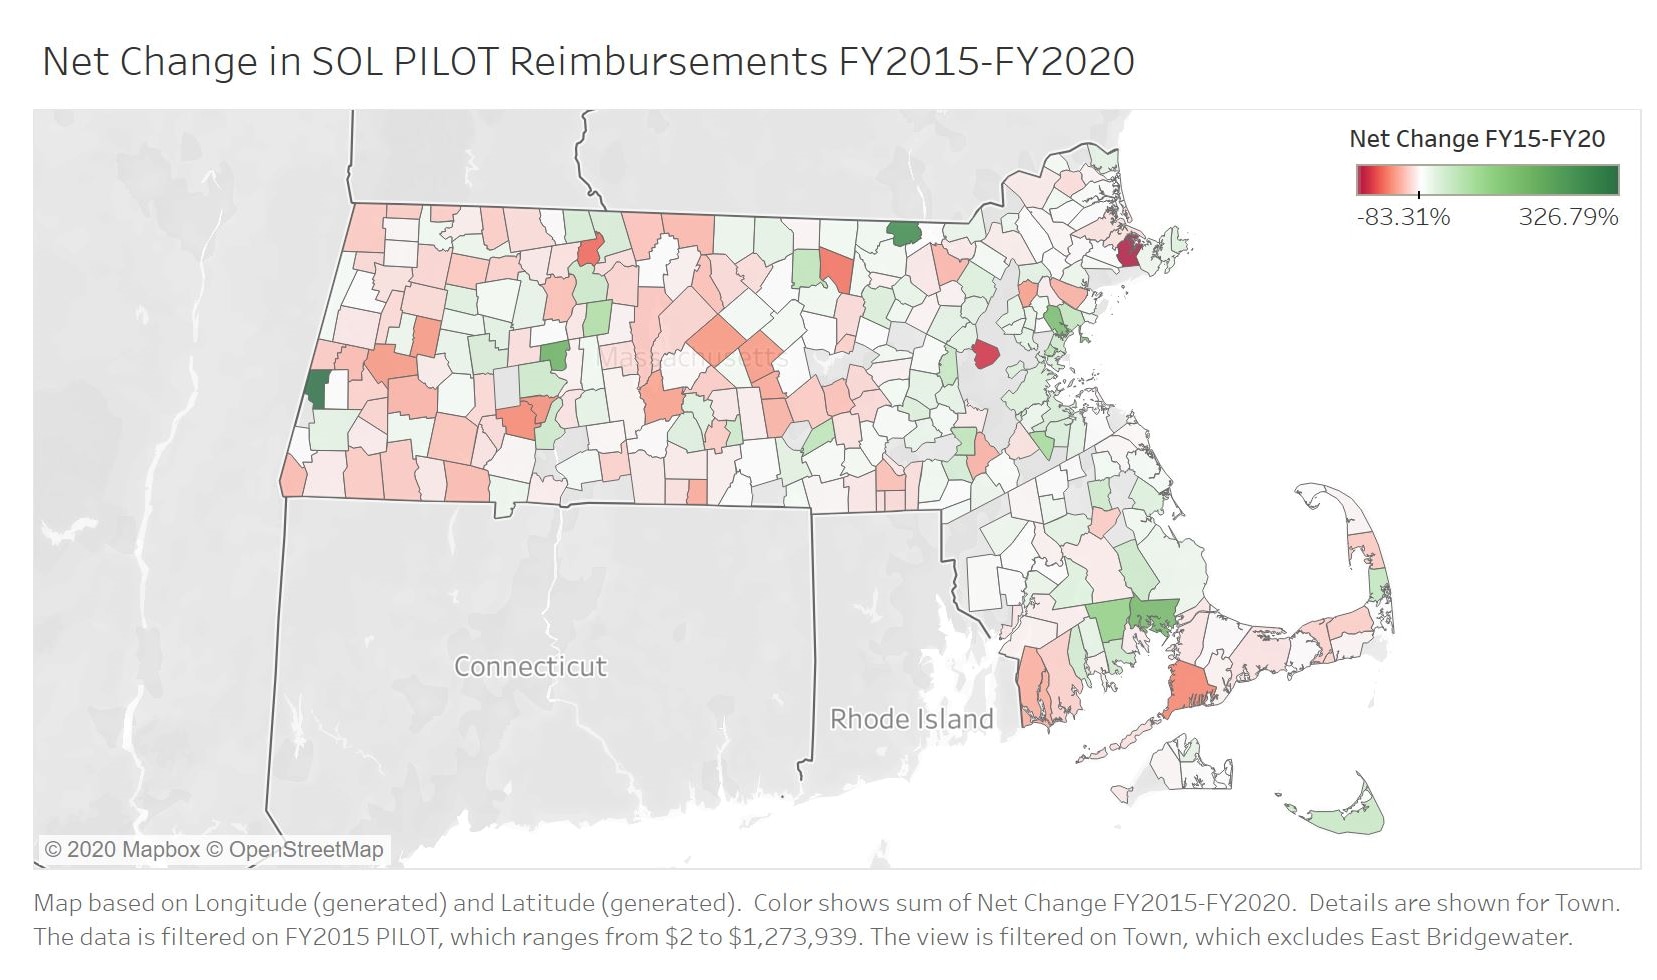 a map of Massachusetts showing the net change in SOL PILOT reimbursements from fiscal year 2015 to 2020 by town. The net change ranged from -83.31% to 326.79%. Many areas in western and central Massachusetts are highlighted red, indicating a decline in SOL PILOT reimbursements.